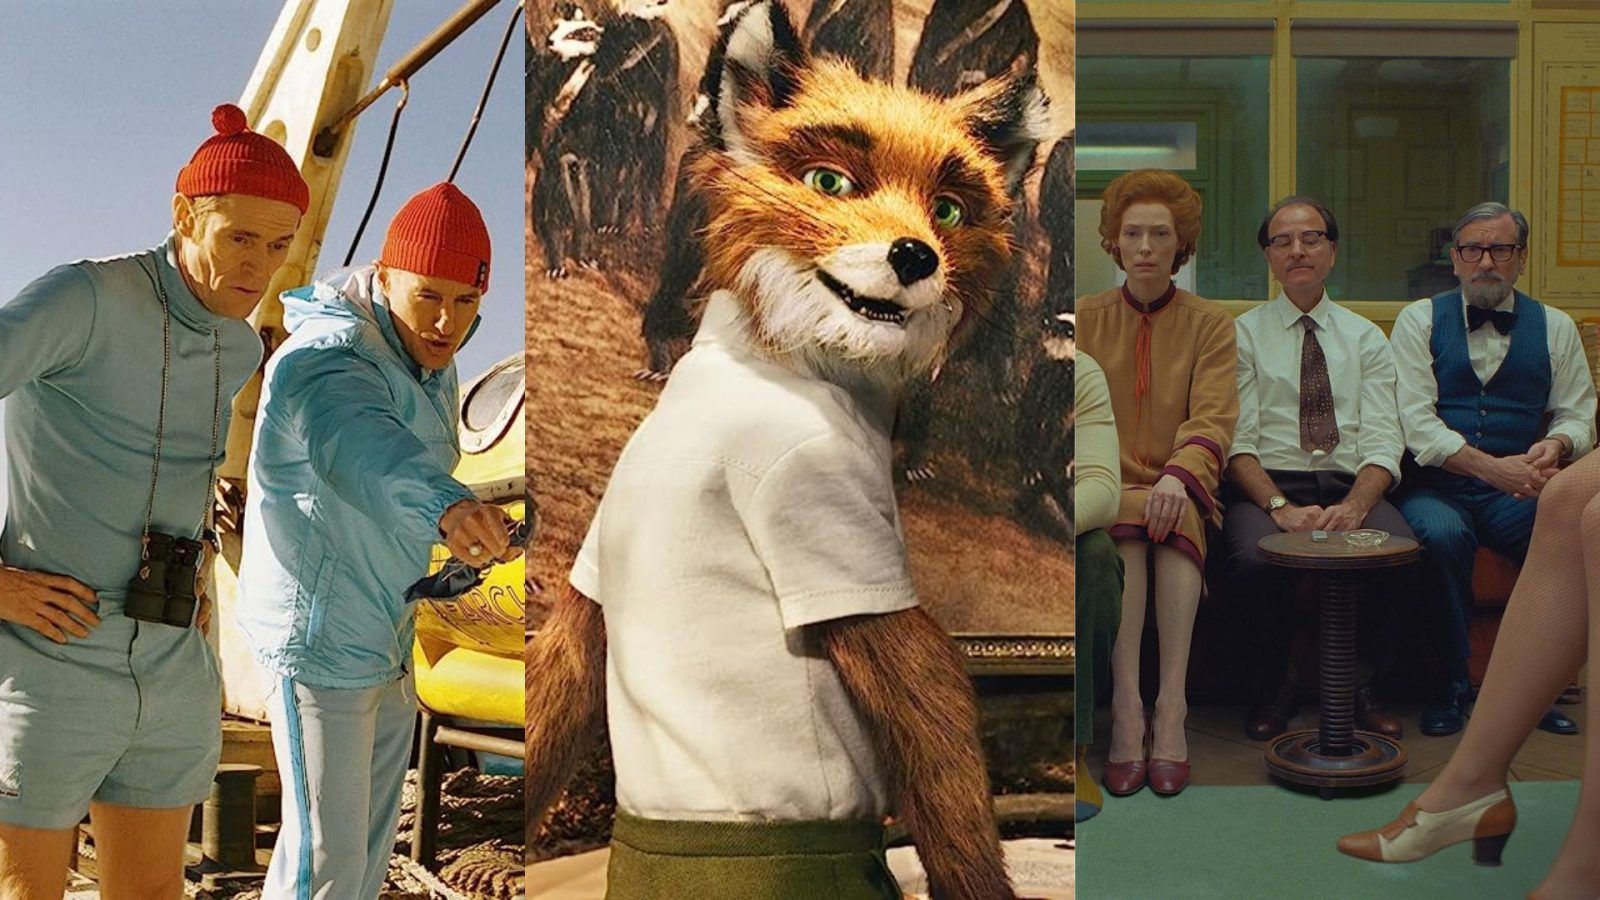 Best Wes Anderson movies to watch according to IMDb rating